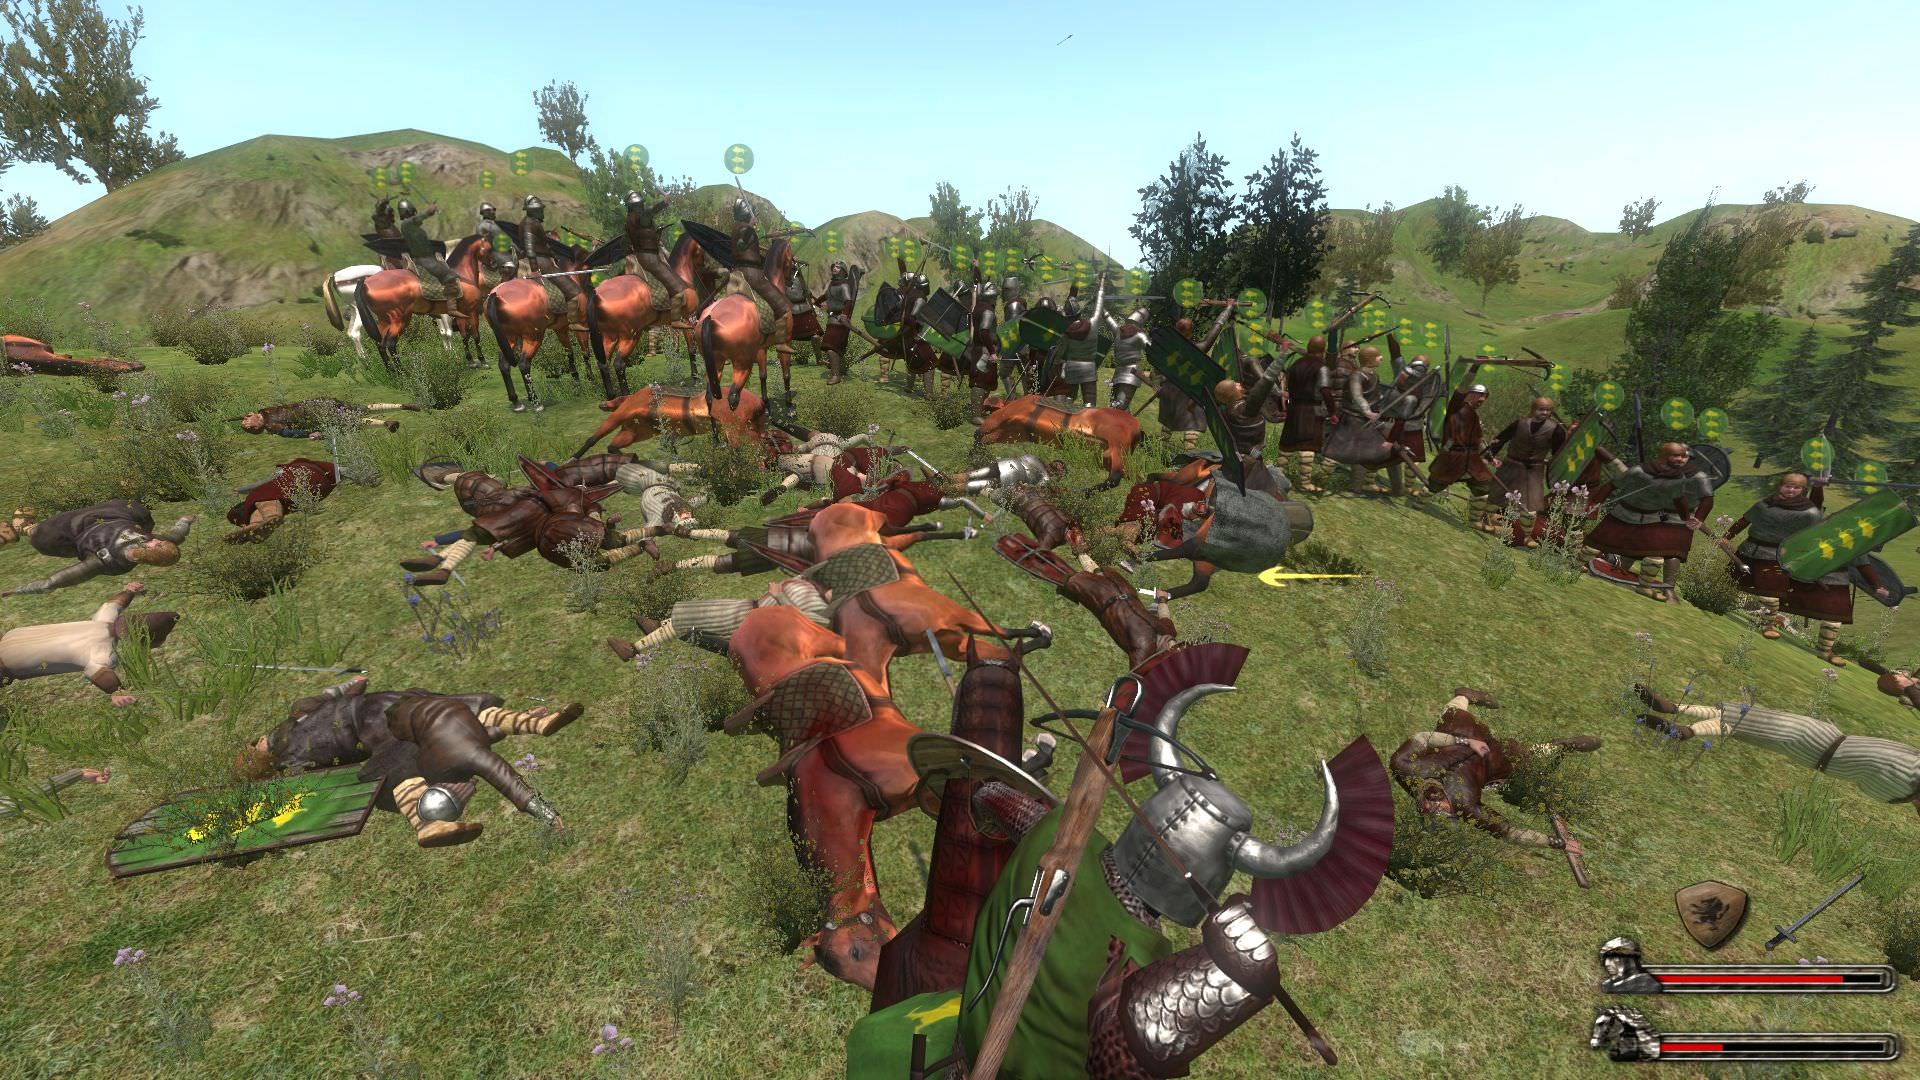 mount and blade warband 1.153 indir